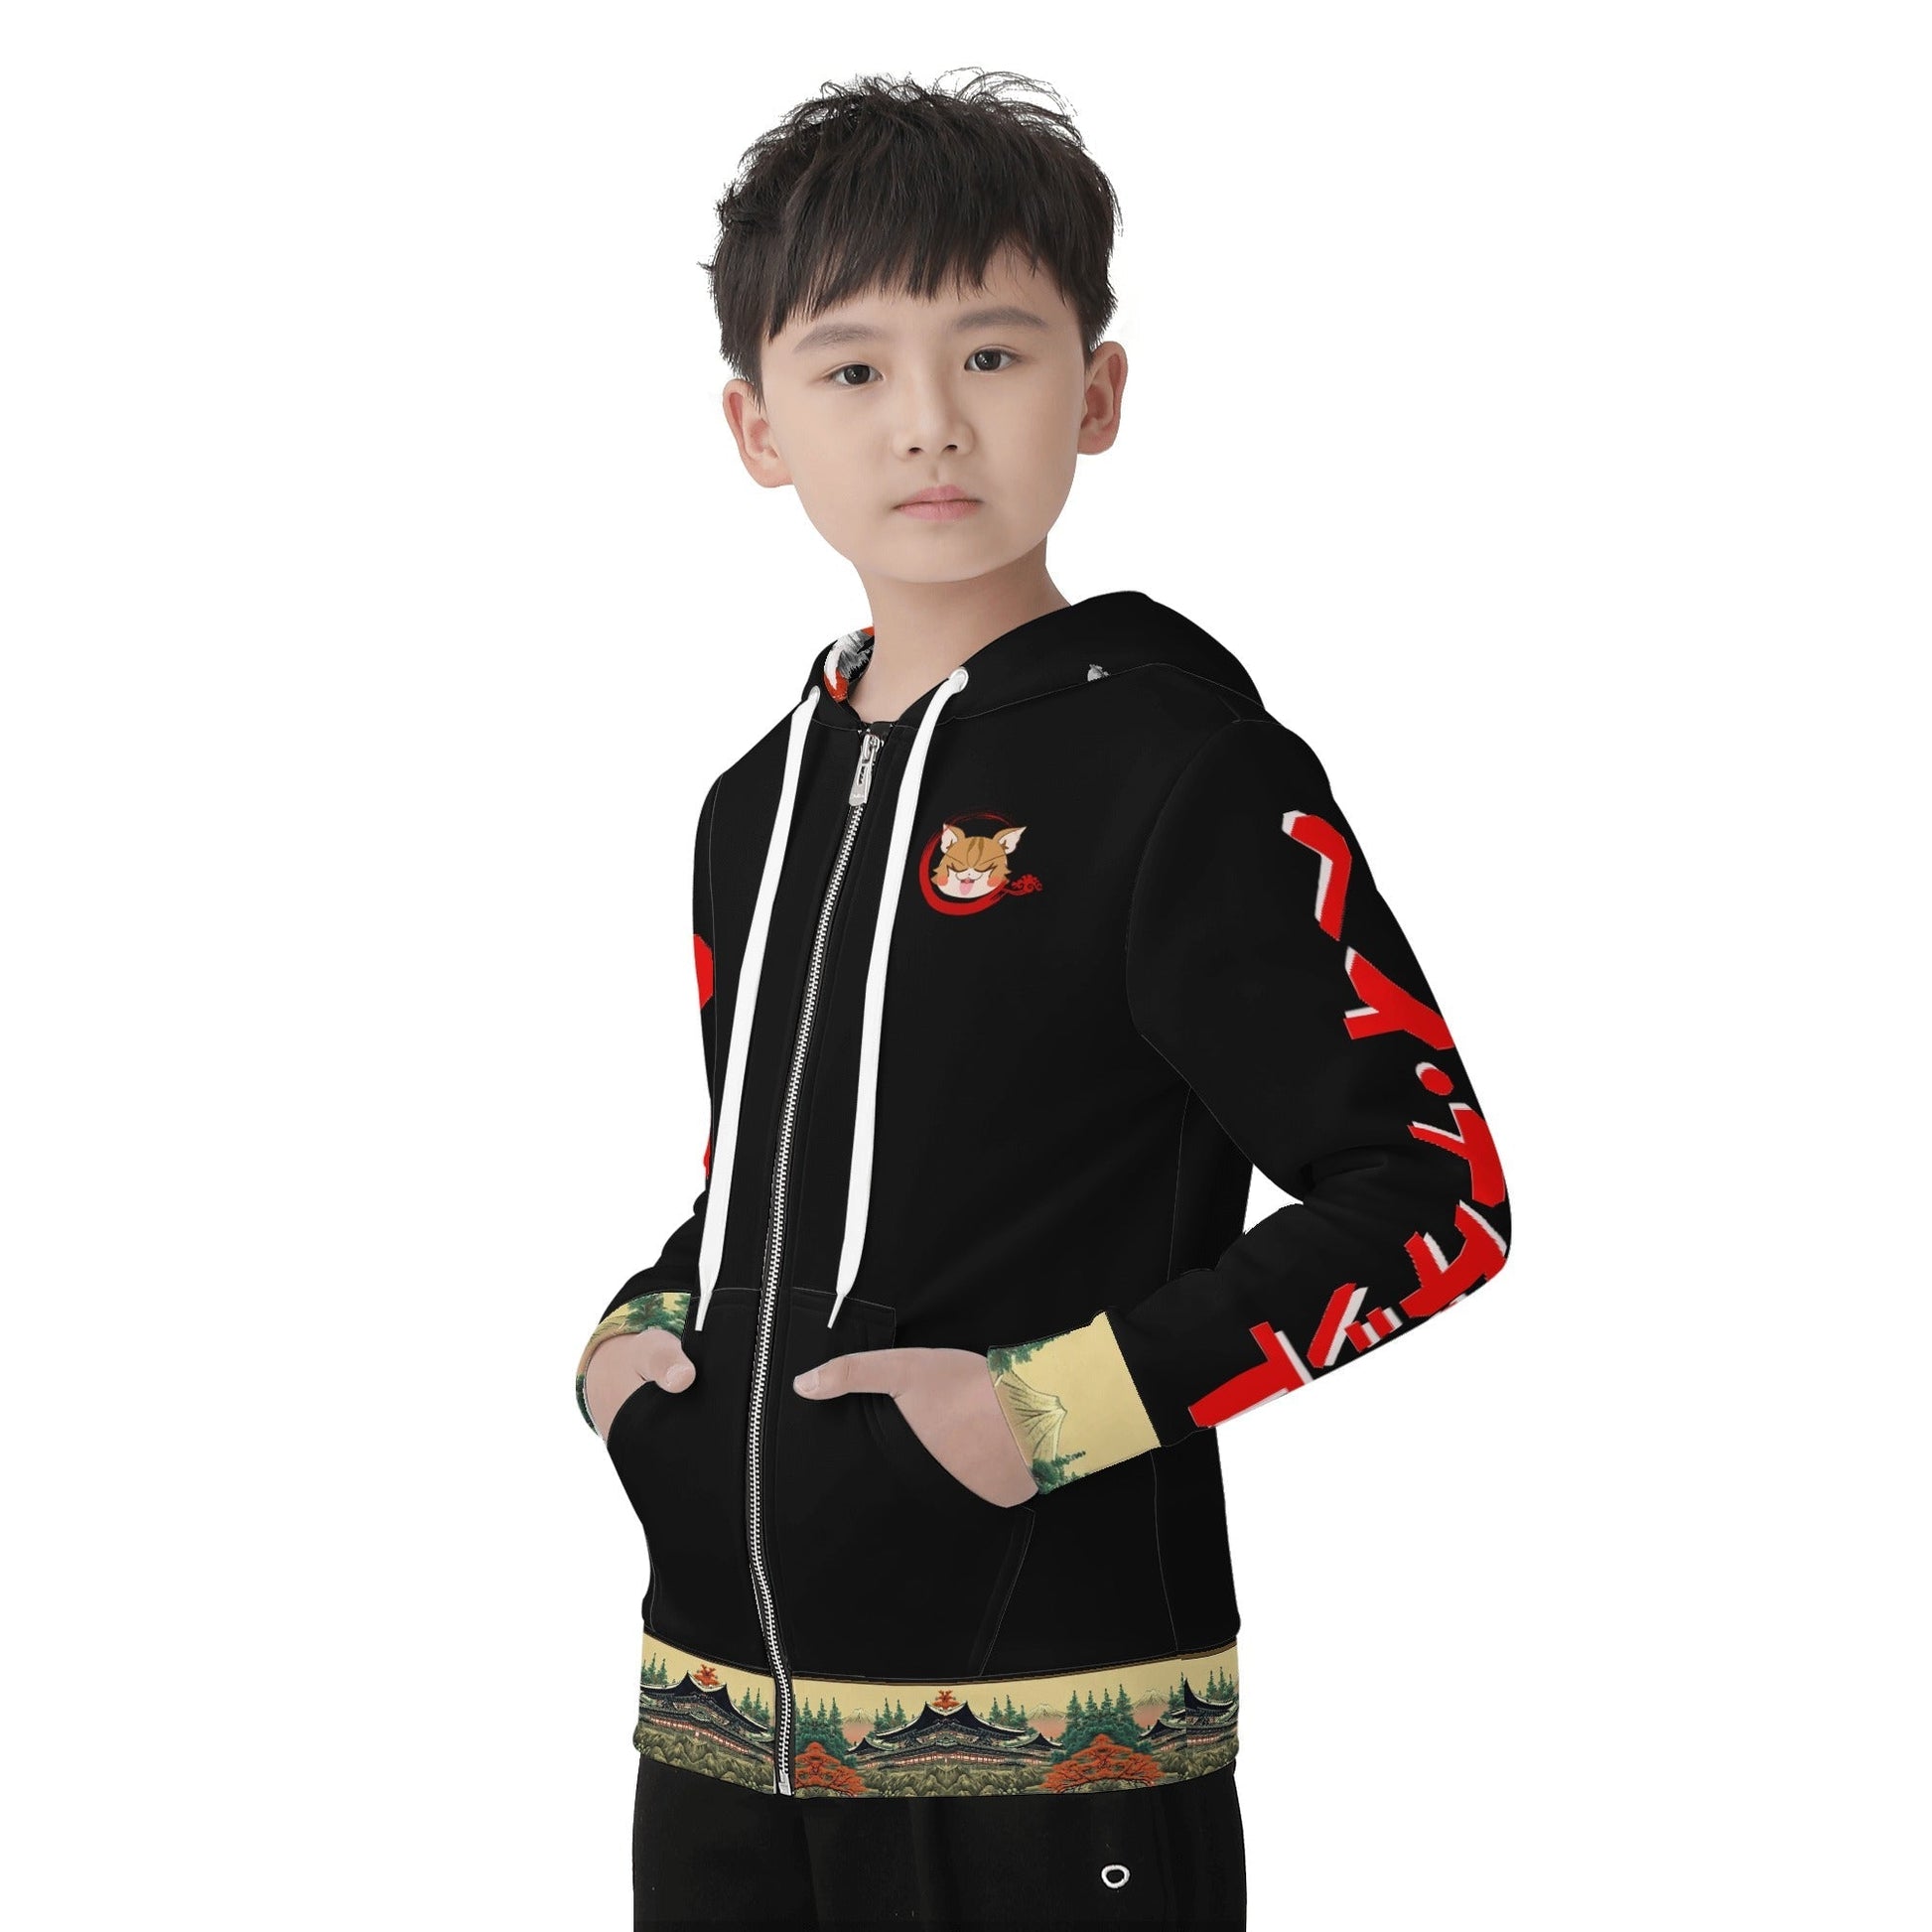 Stand out  with the  Tokyo Nugget Children Zip Hoodie  available at Hey Nugget. Grab yours today!